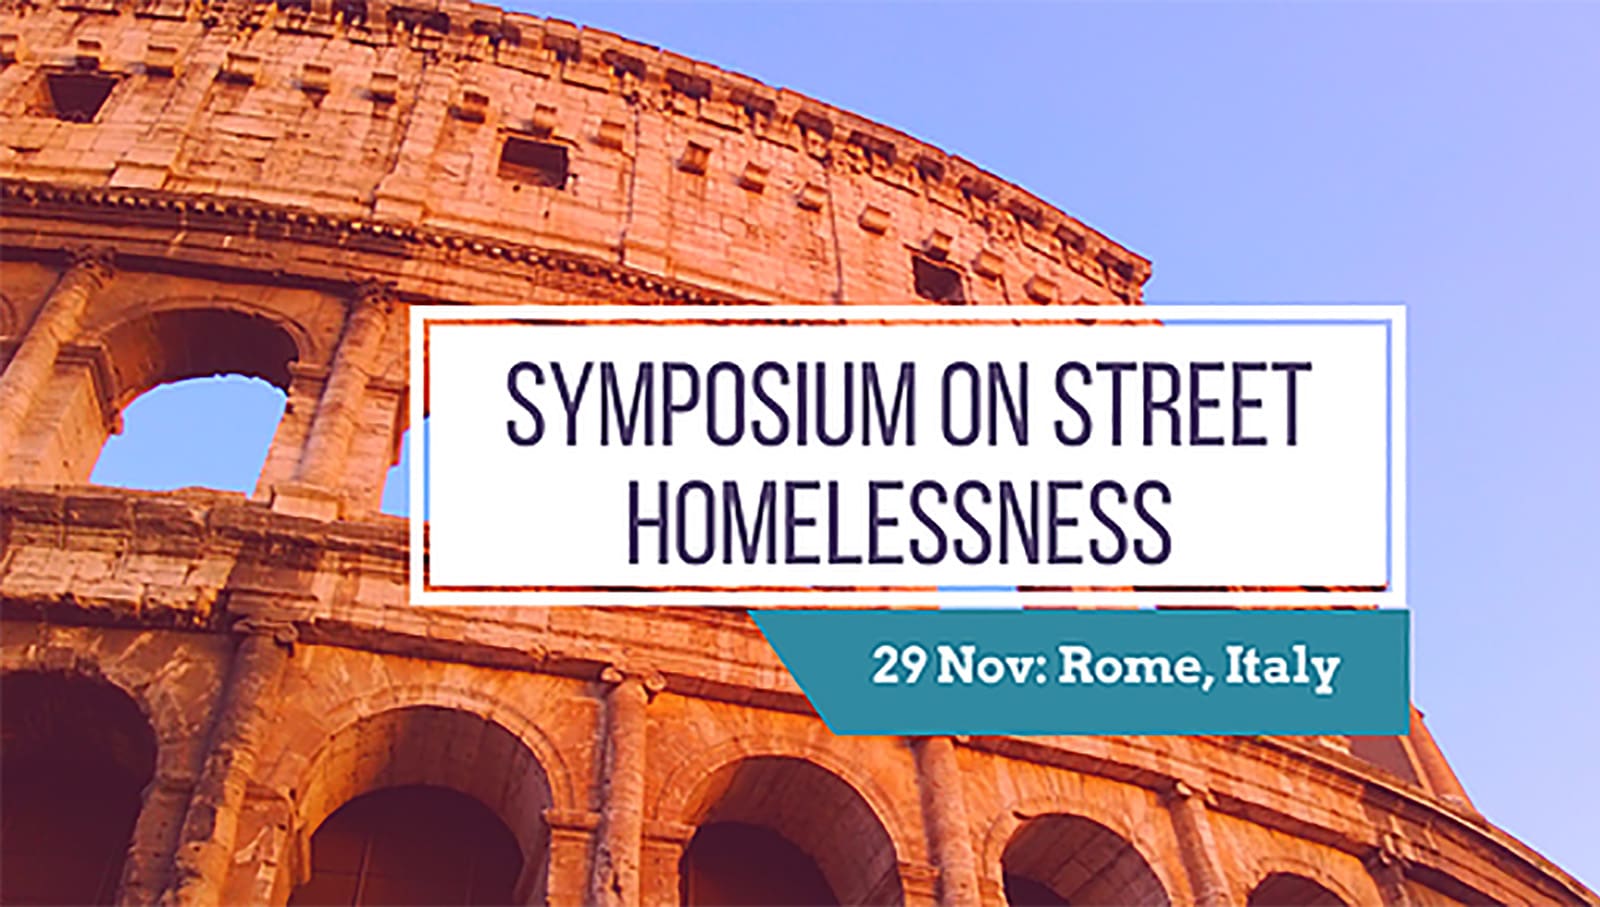 Symposium on Street Homelessness and Catholic Social Teaching in Rome, Italy